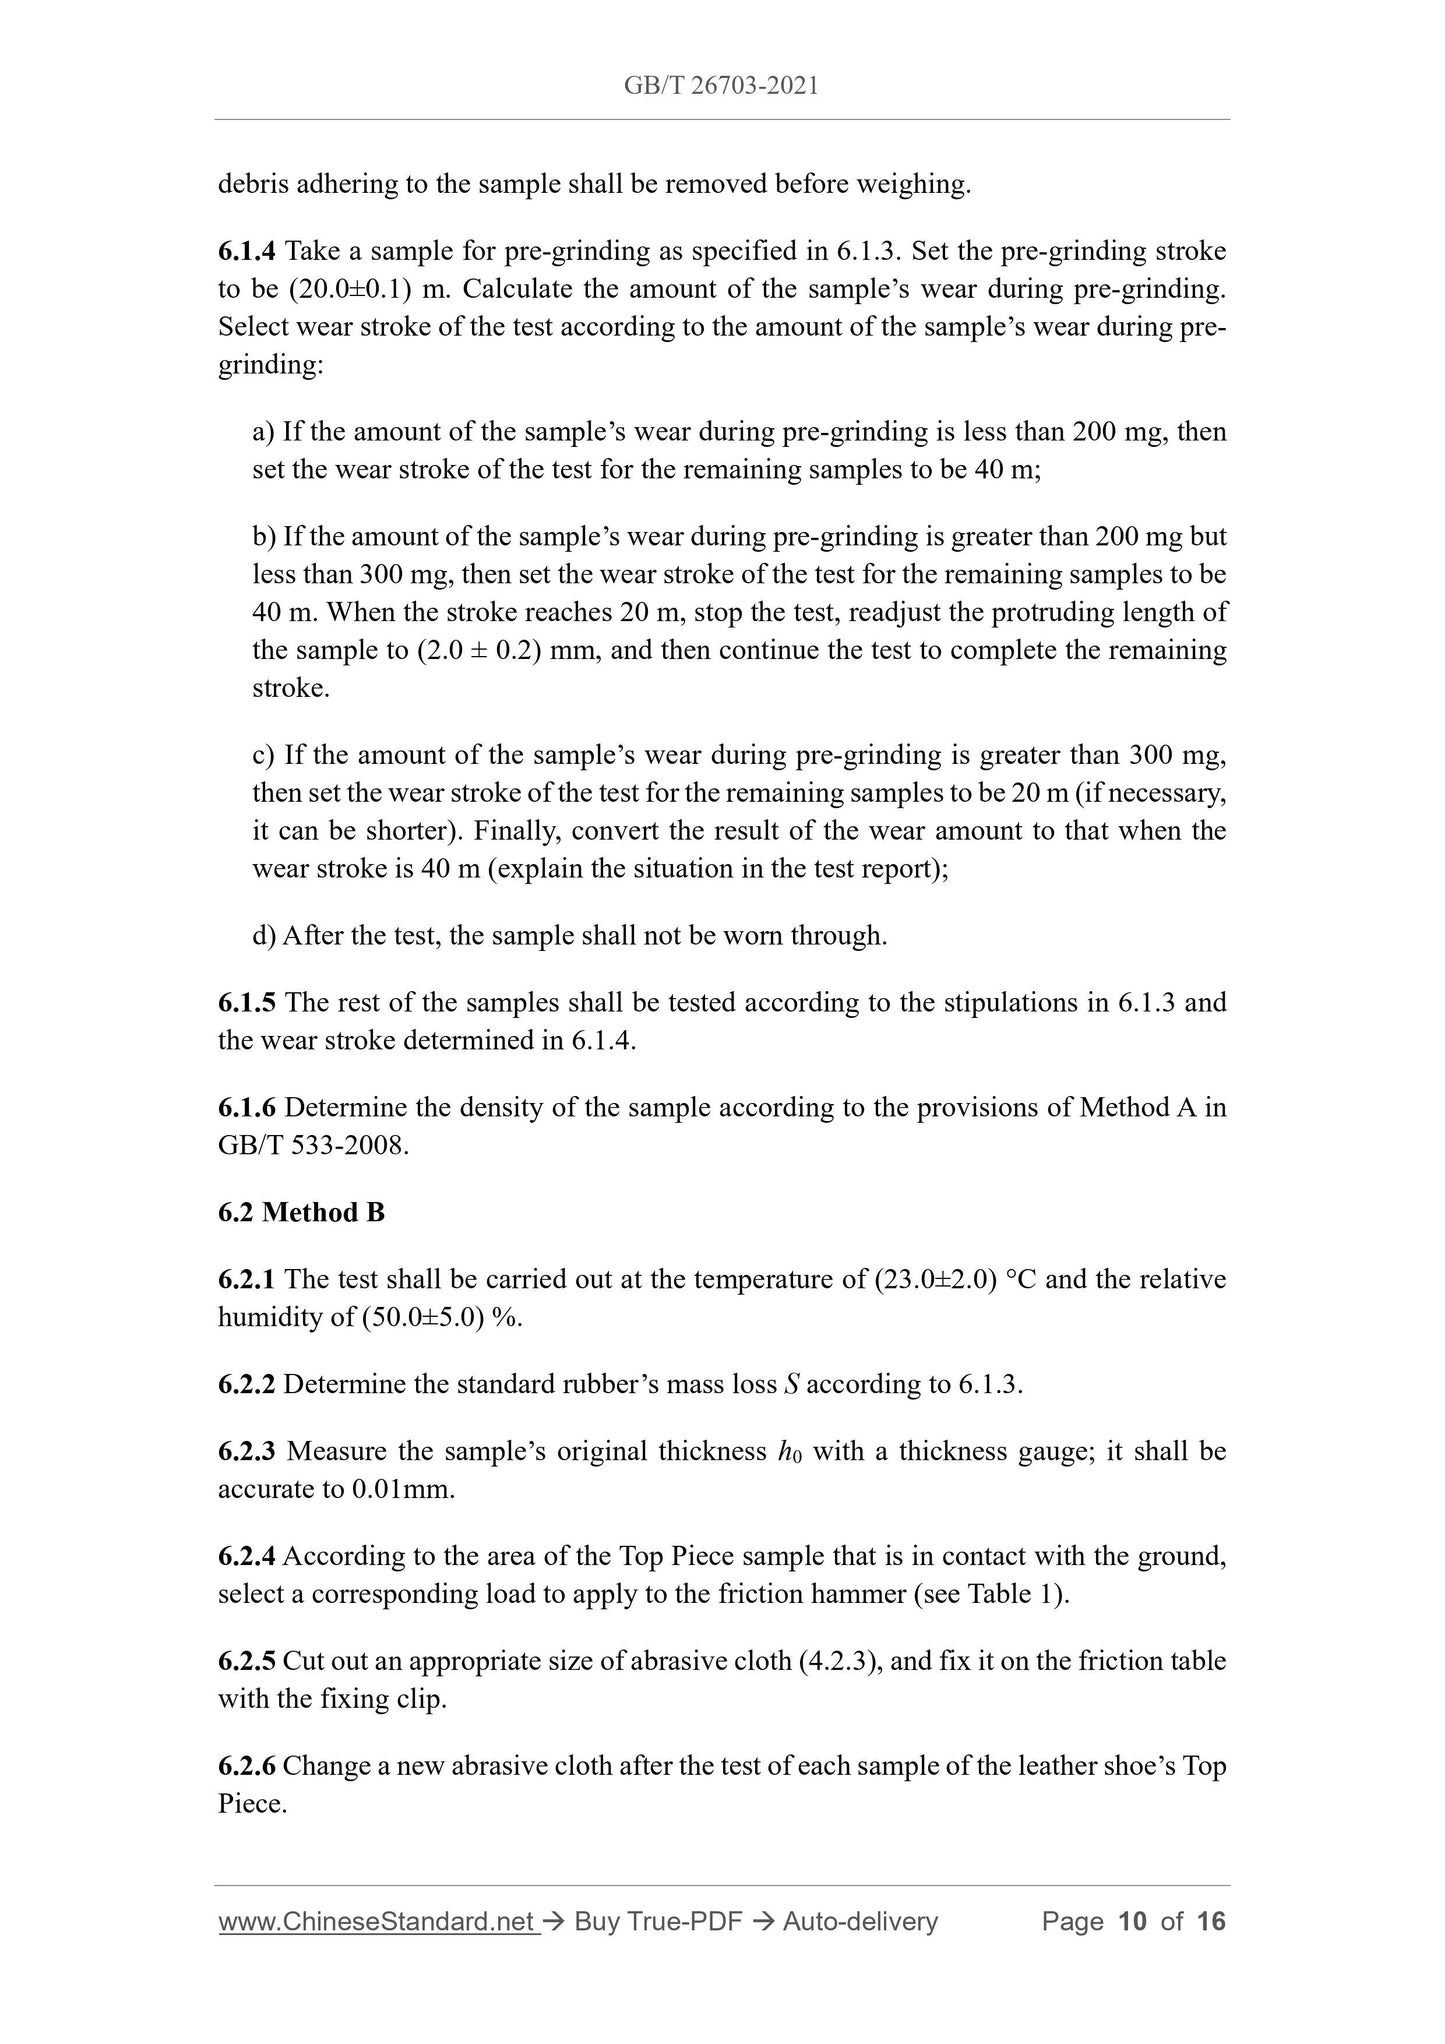 GB/T 26703-2021 Page 6